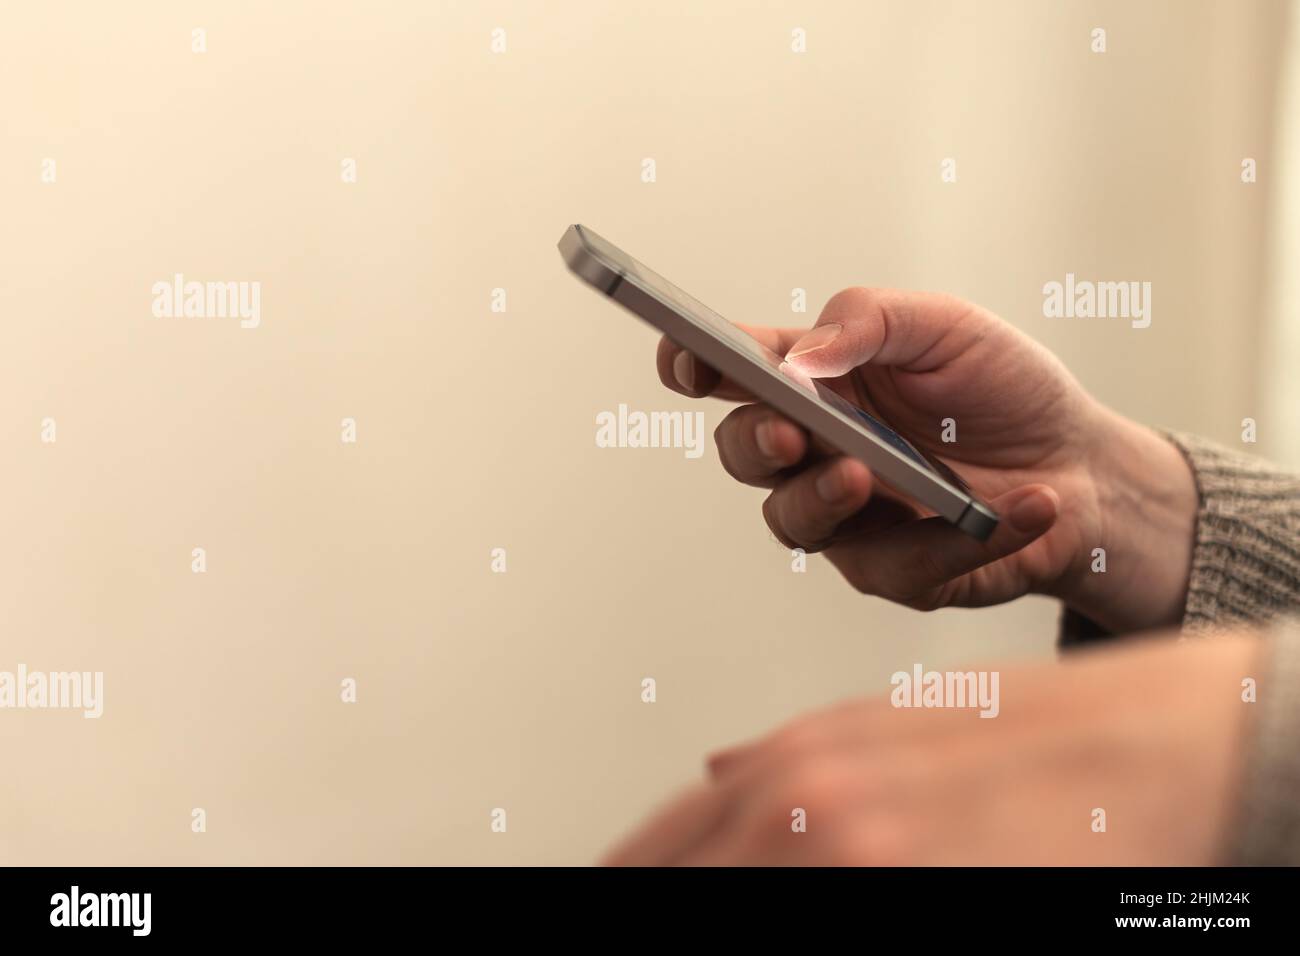 Closeup of female hands using smartphone for communication in living room, selective focus Stock Photo